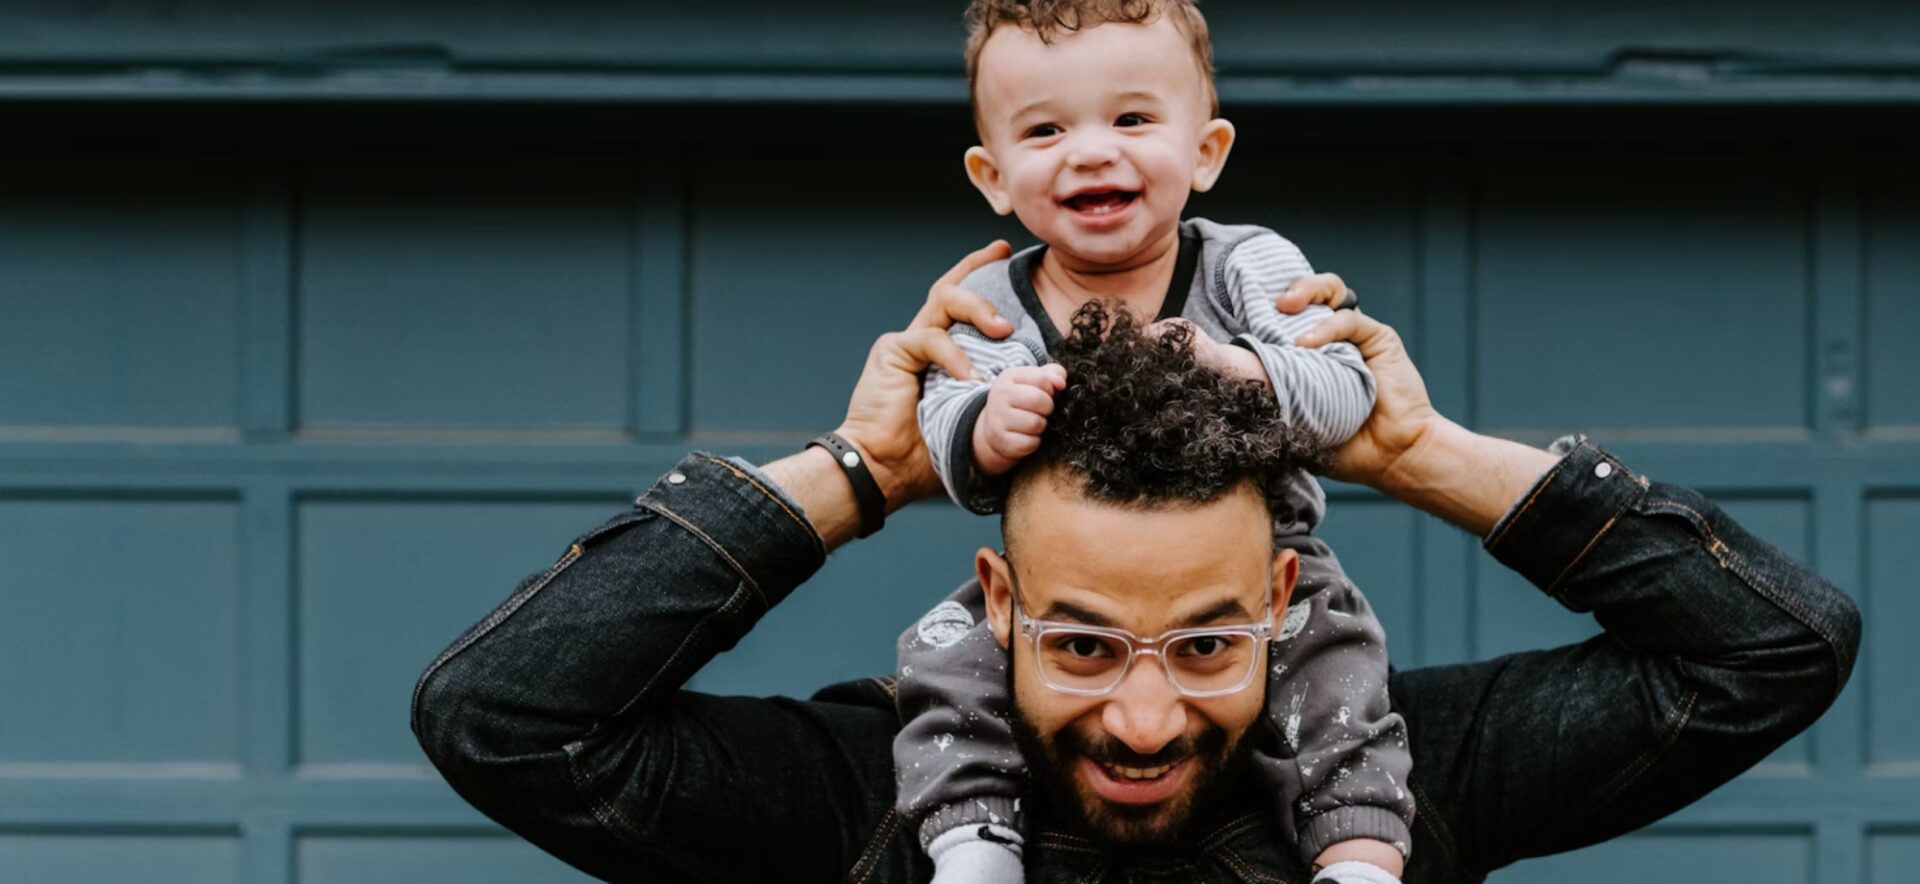 Hispanic male with denim jacket and glasses holds young child on his shoulders while the infant plays with dad's curly hair.